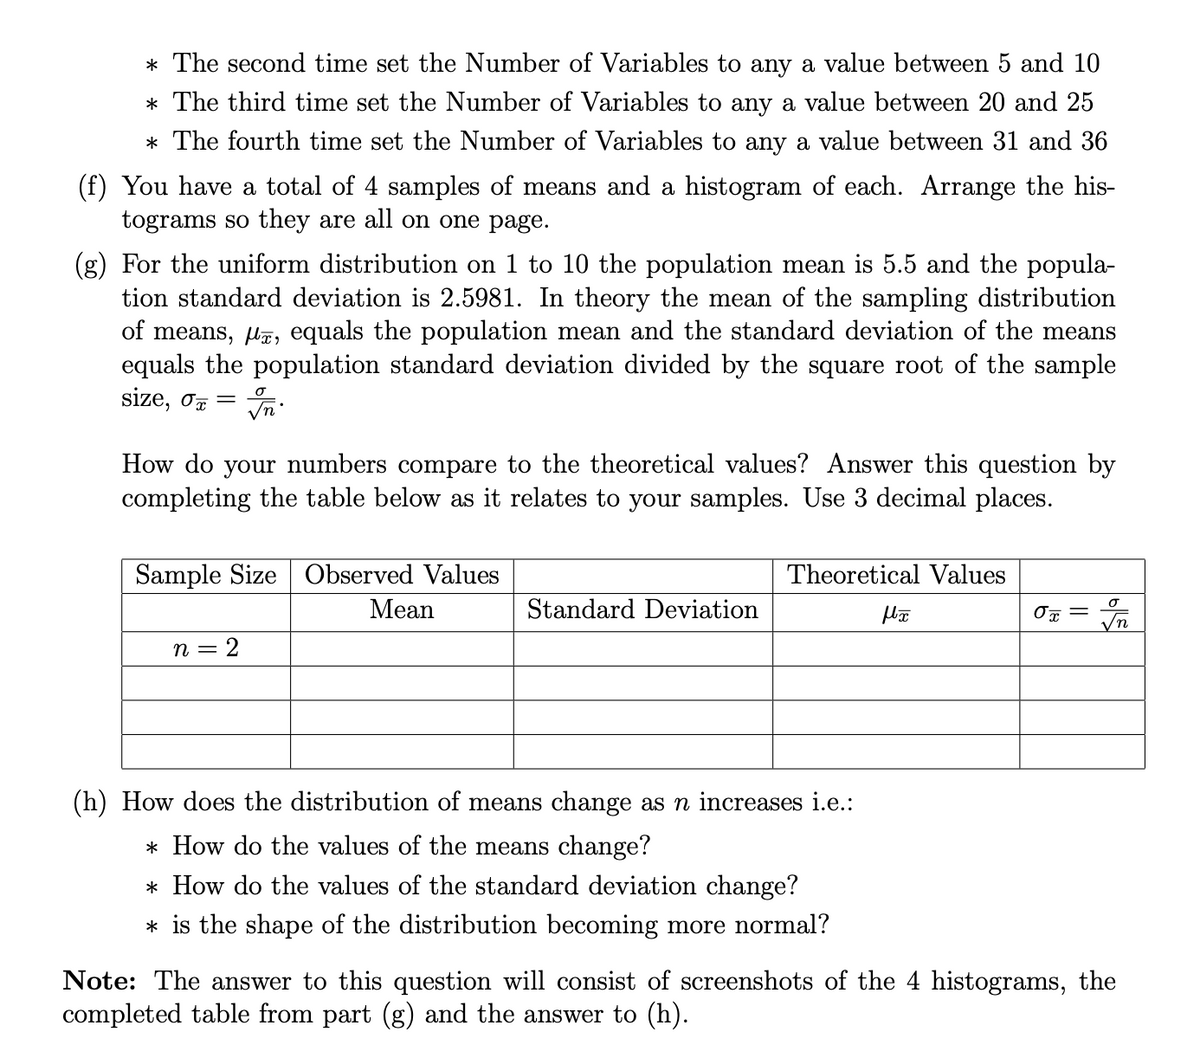 * The second time set the Number of Variables to any a value between 5 and 10
* The third time set the Number of Variables to any a value between 20 and 25
* The fourth time set the Number of Variables to any a value between 31 and 36
(f) You have a total of 4 samples of means and a histogram of each. Arrange the his-
tograms so they are all on one page.
(g) For the uniform distribution on 1 to 10 the population mean is 5.5 and the popula-
tion standard deviation is 2.5981. In theory the mean of the sampling distribution
of means, lz, equals the population mean and the standard deviation of the means
equals the population standard deviation divided by the square root of the sample
size, o7 =
How do your numbers compare to the theoretical values? Answer this question by
completing the table below as it relates to your samples. Use 3 decimal places.
Sample Size Observed Values
Theoretical Values
Mean
Standard Deviation
2
(h) How does the distribution of means change as n increases i.e.:
* How do the values of the means change?
* How do the values of the standard deviation change?
* is the shape of the distribution becoming more normal?
Note: The answer to this question will consist of screenshots of the 4 histograms, the
completed table from part (g) and the answer to (h).
